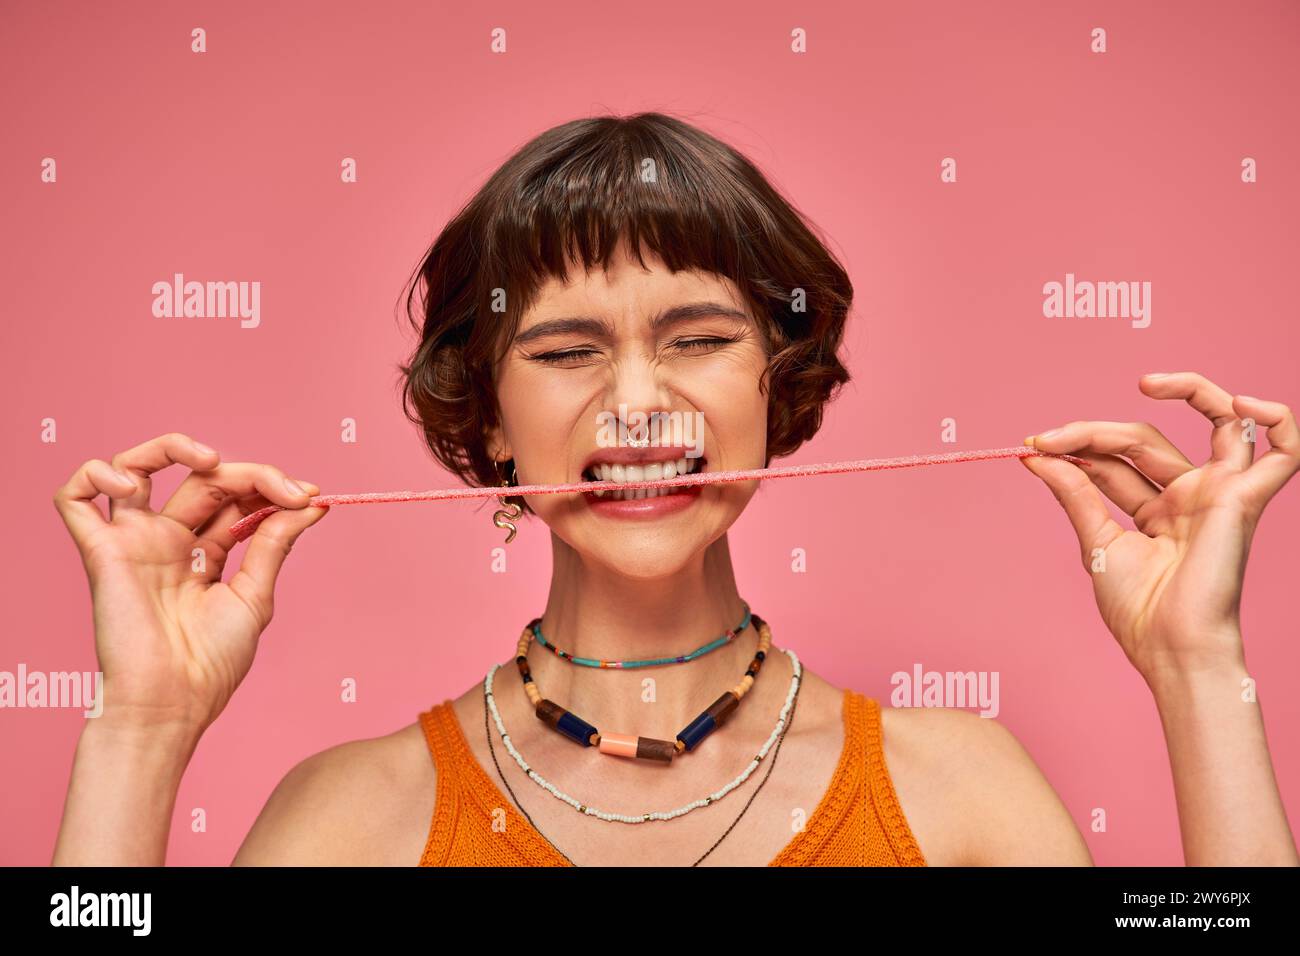 expressive and young woman with nose piercing biting sweet and sour candy strip on pink background Stock Photo